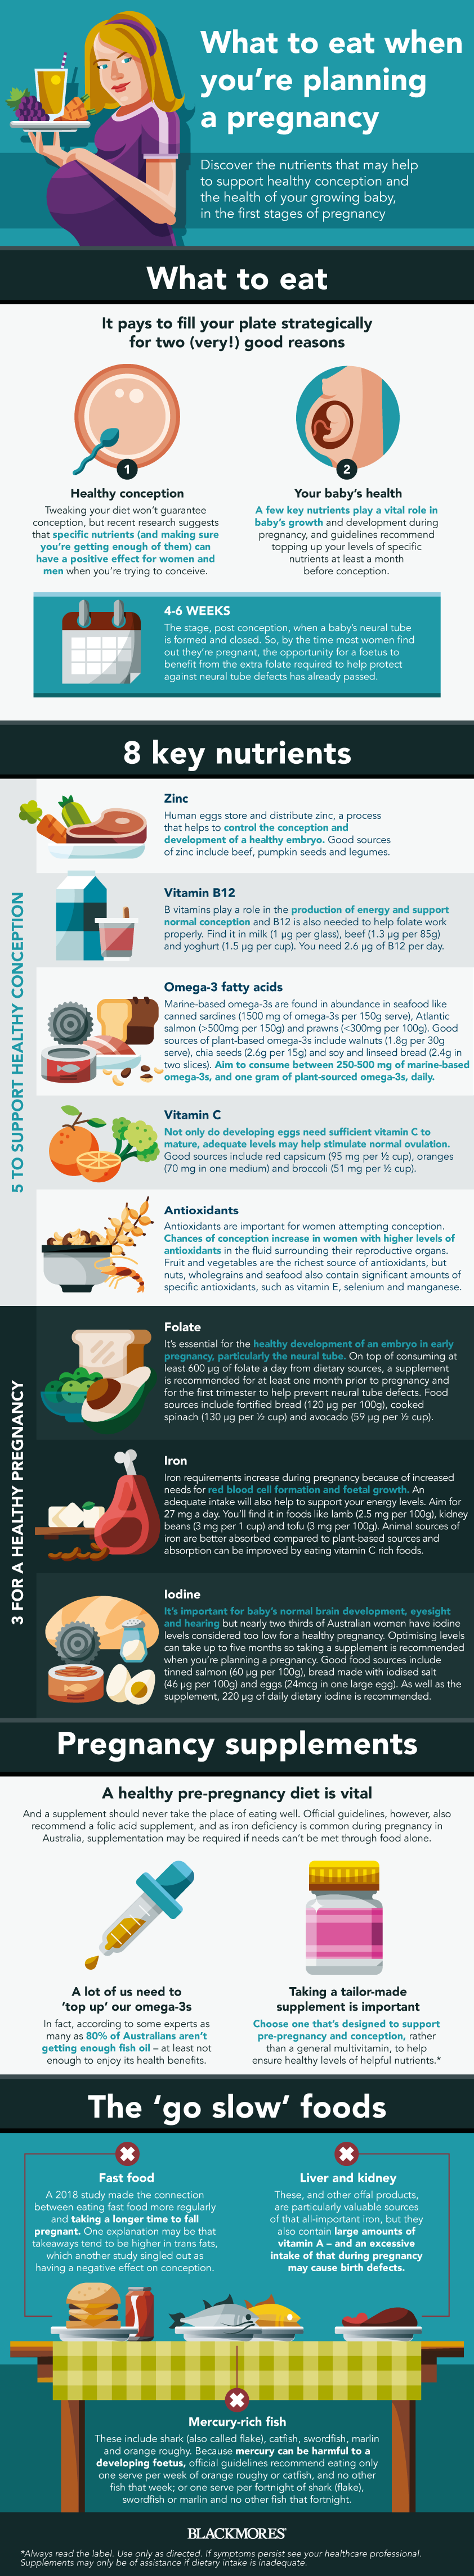 What to eat when you are planning a pregnancy { INFOGRAPHIC} | Blackmores